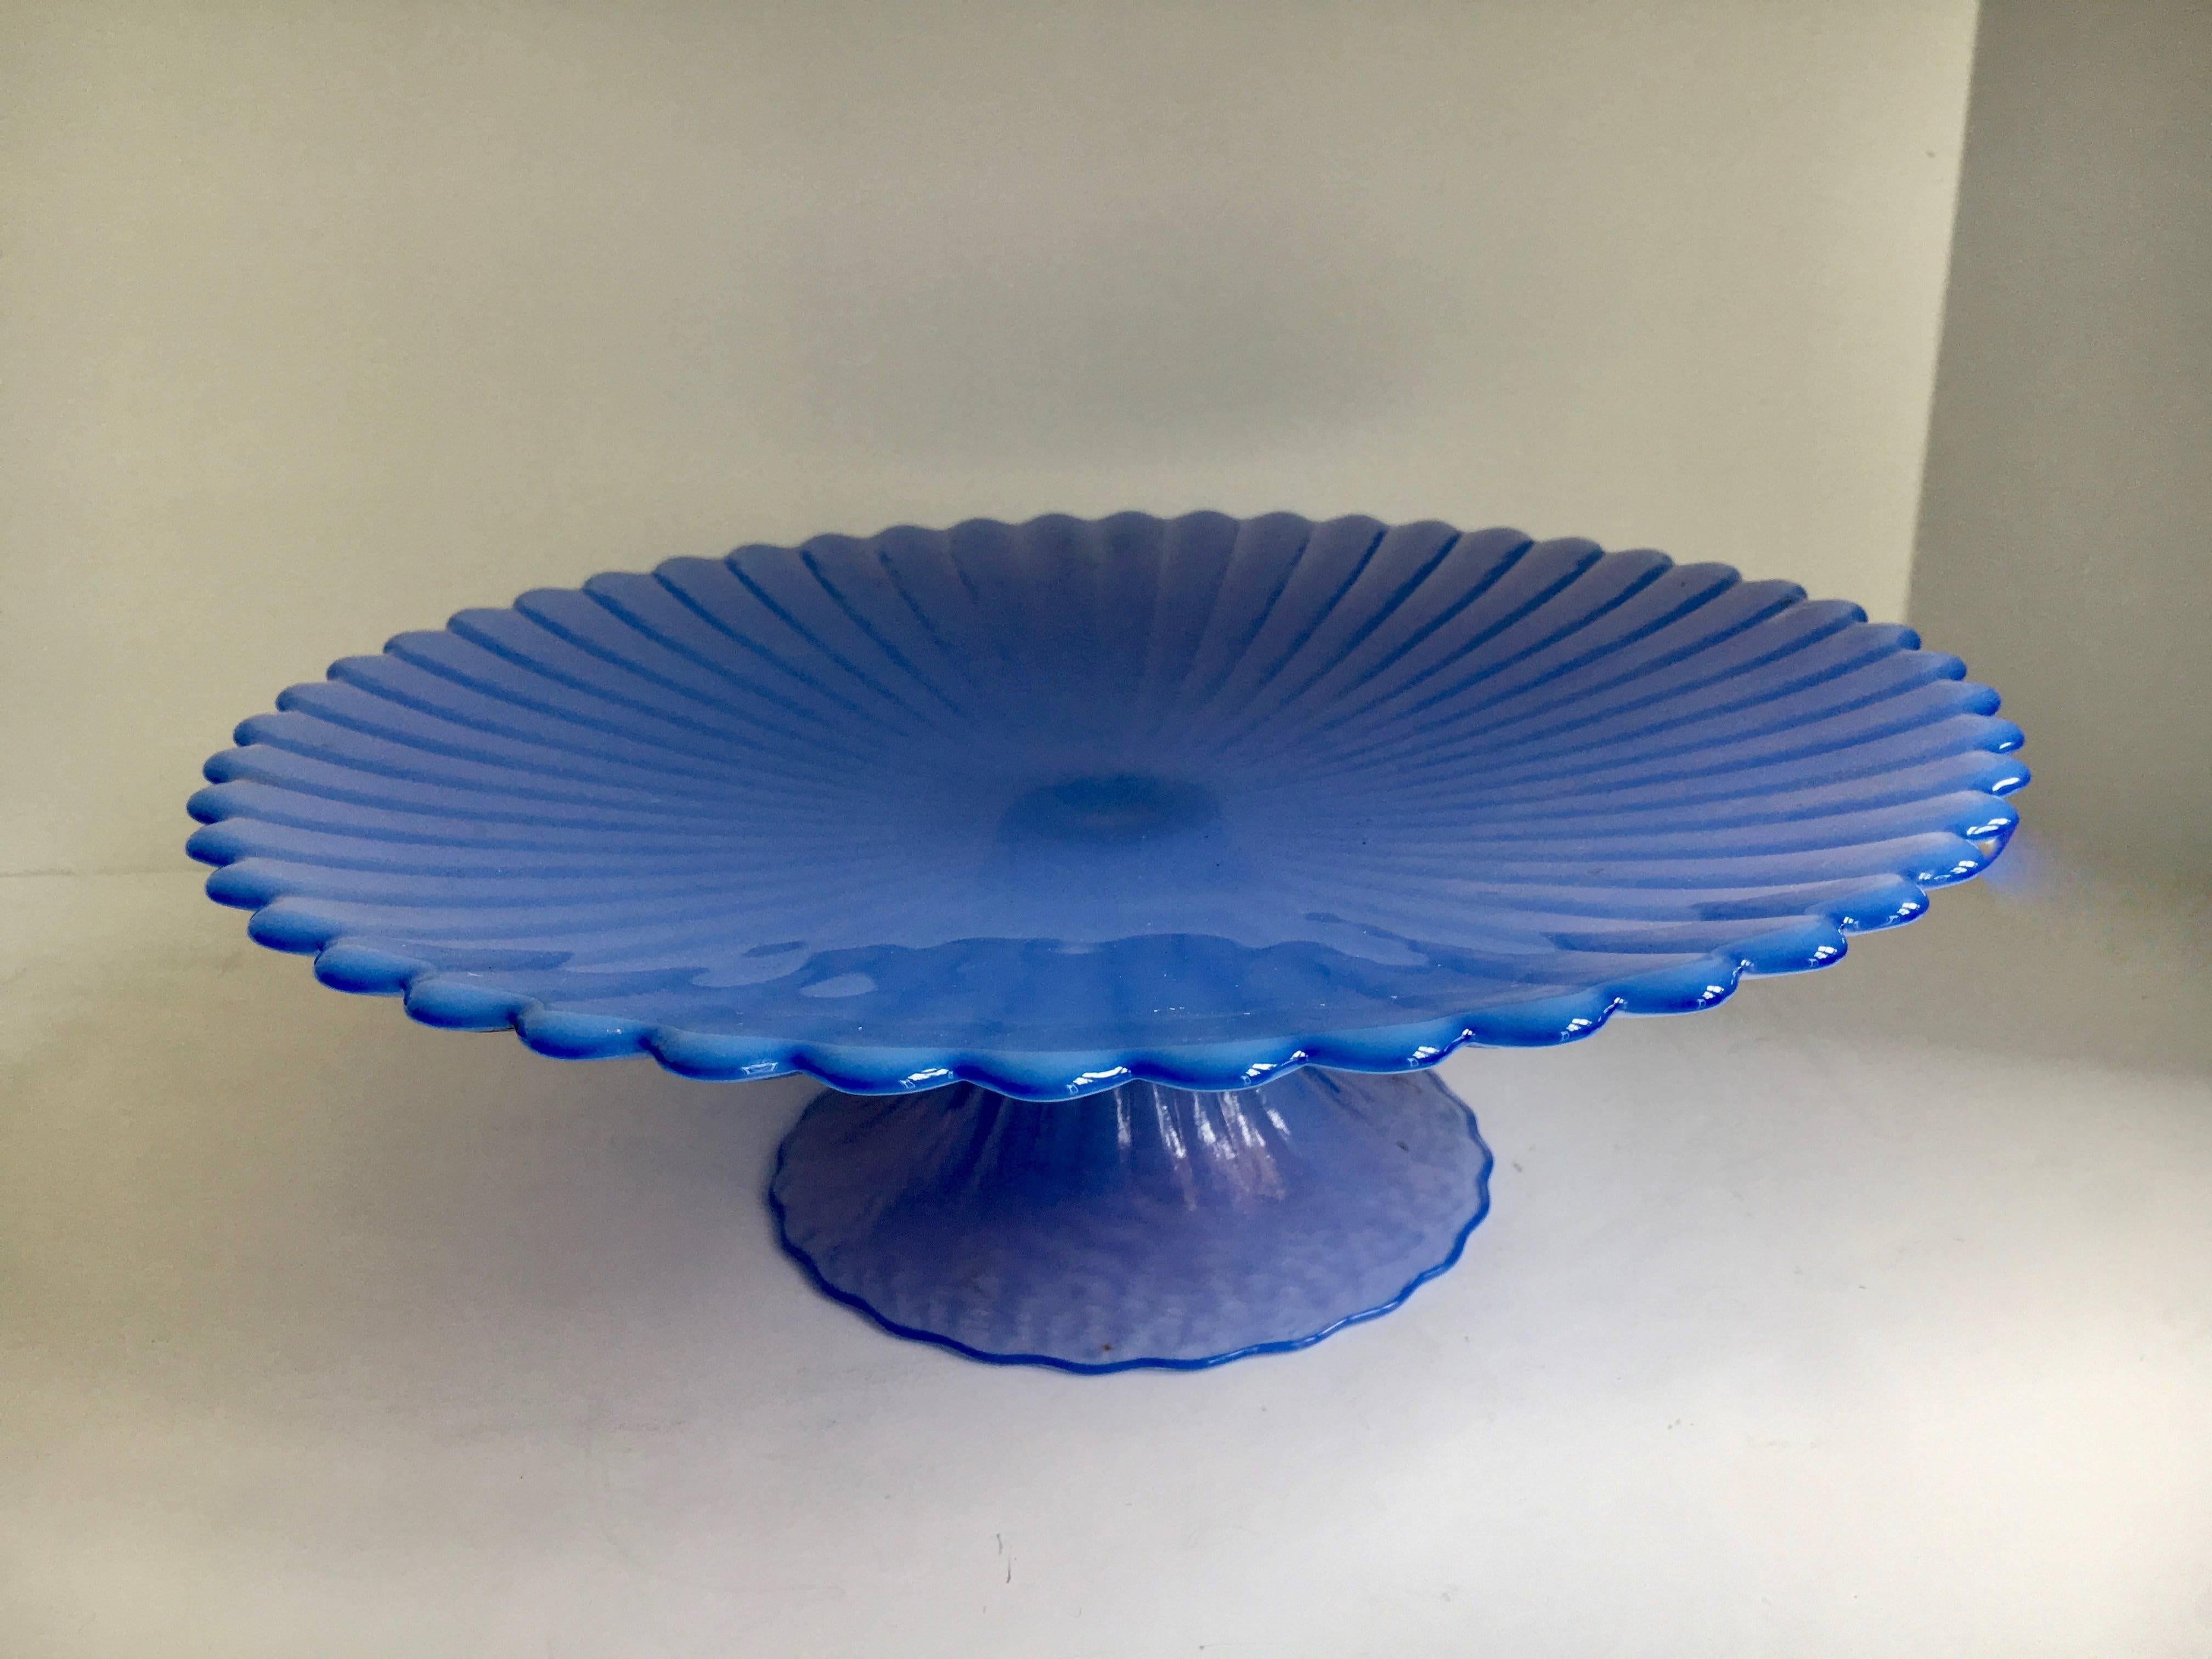 Signed blue Murano cake pedestal plate - a unique and stunning blue color, signed Murano on bottom - great for cakes or desserts.

The base and serving surround are scored as a lovely detail in the brilliant blue glass.